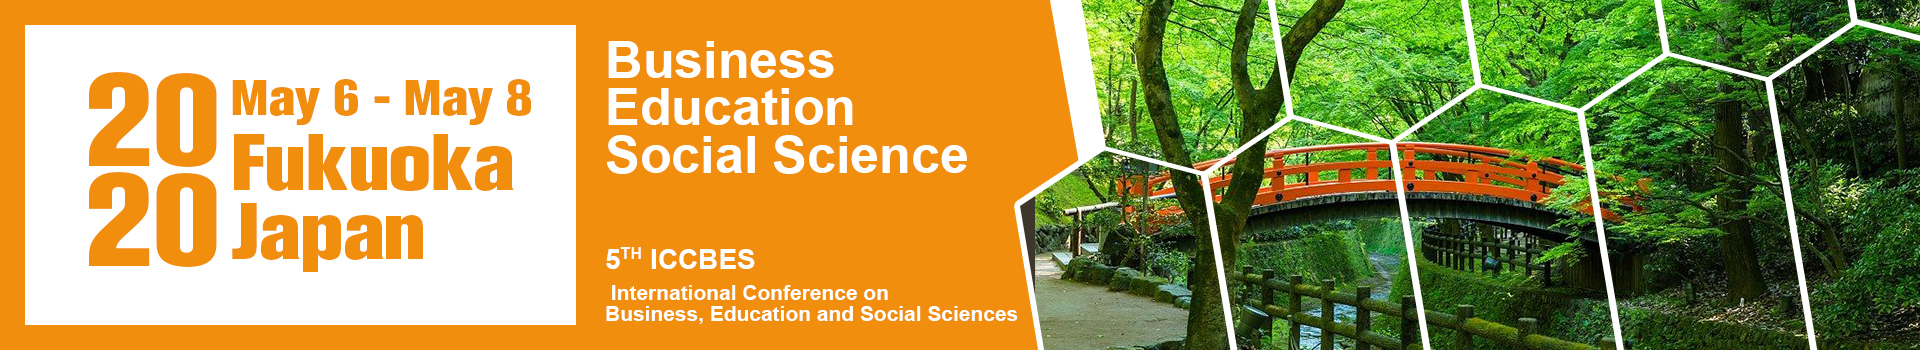 2020 ICCBES International Conference on Business, Education and Social Sciences, Fukuoka, Japan